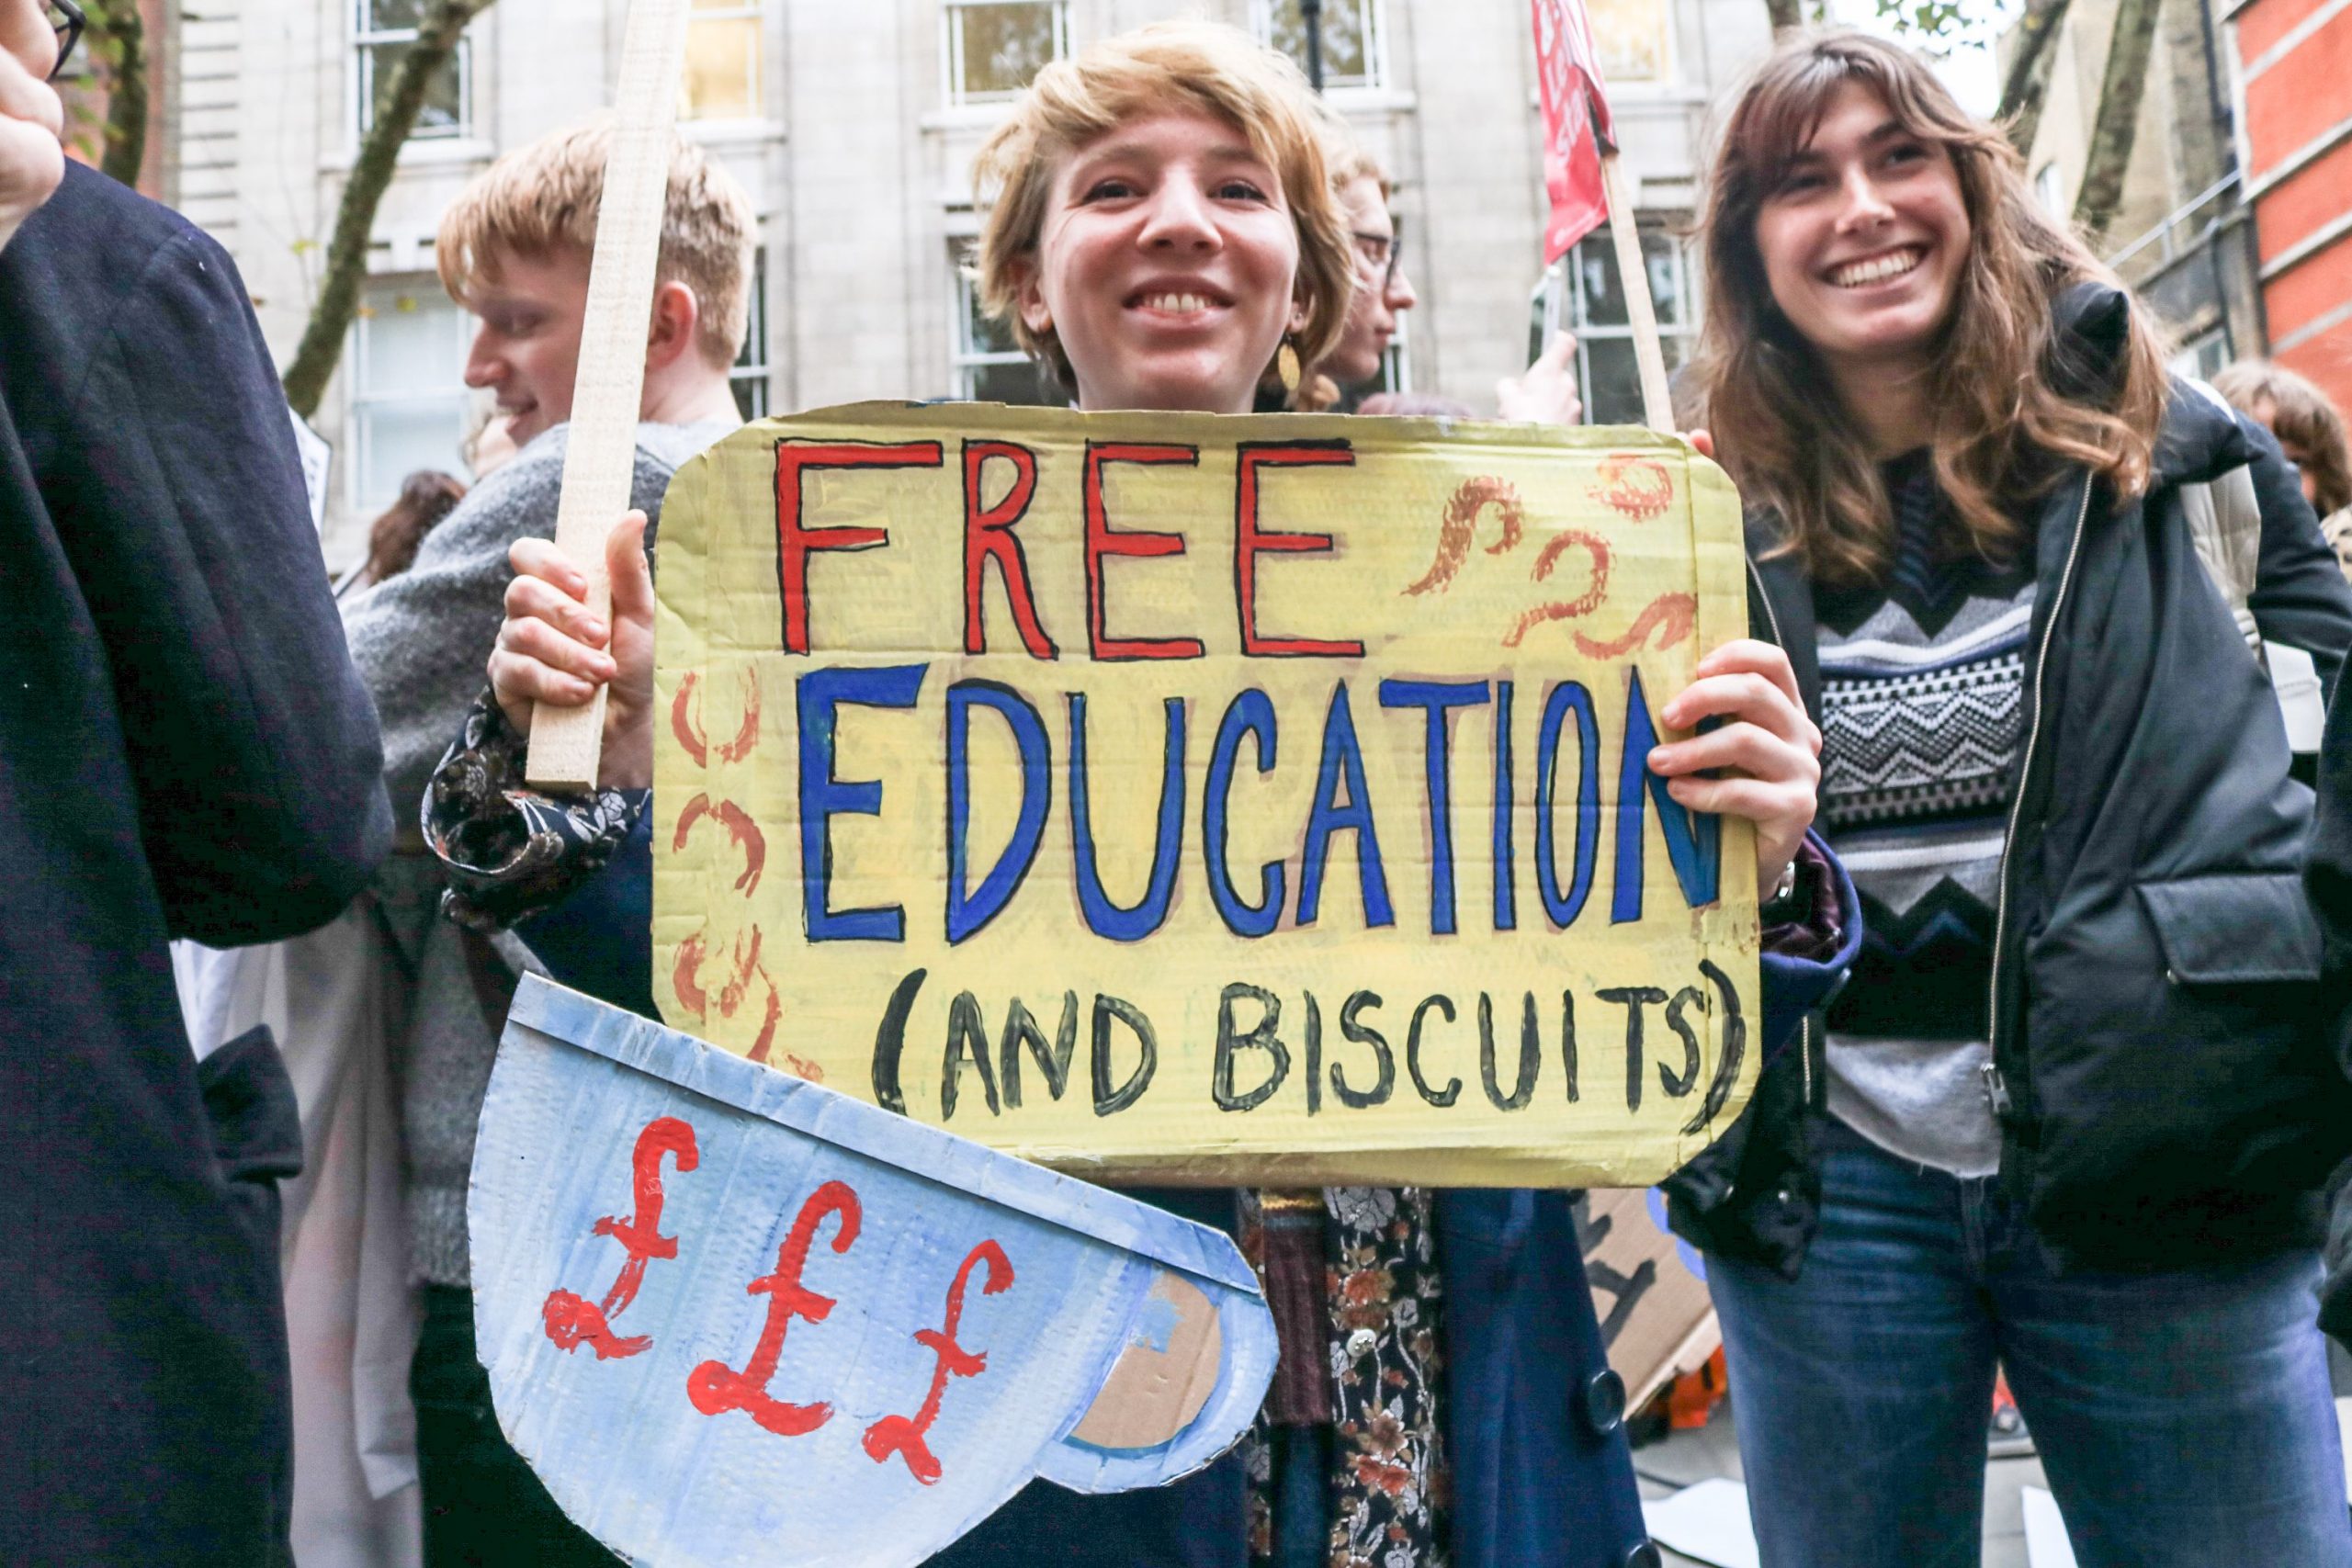 Students protesting holding a sign reading Free education (and biscuits)